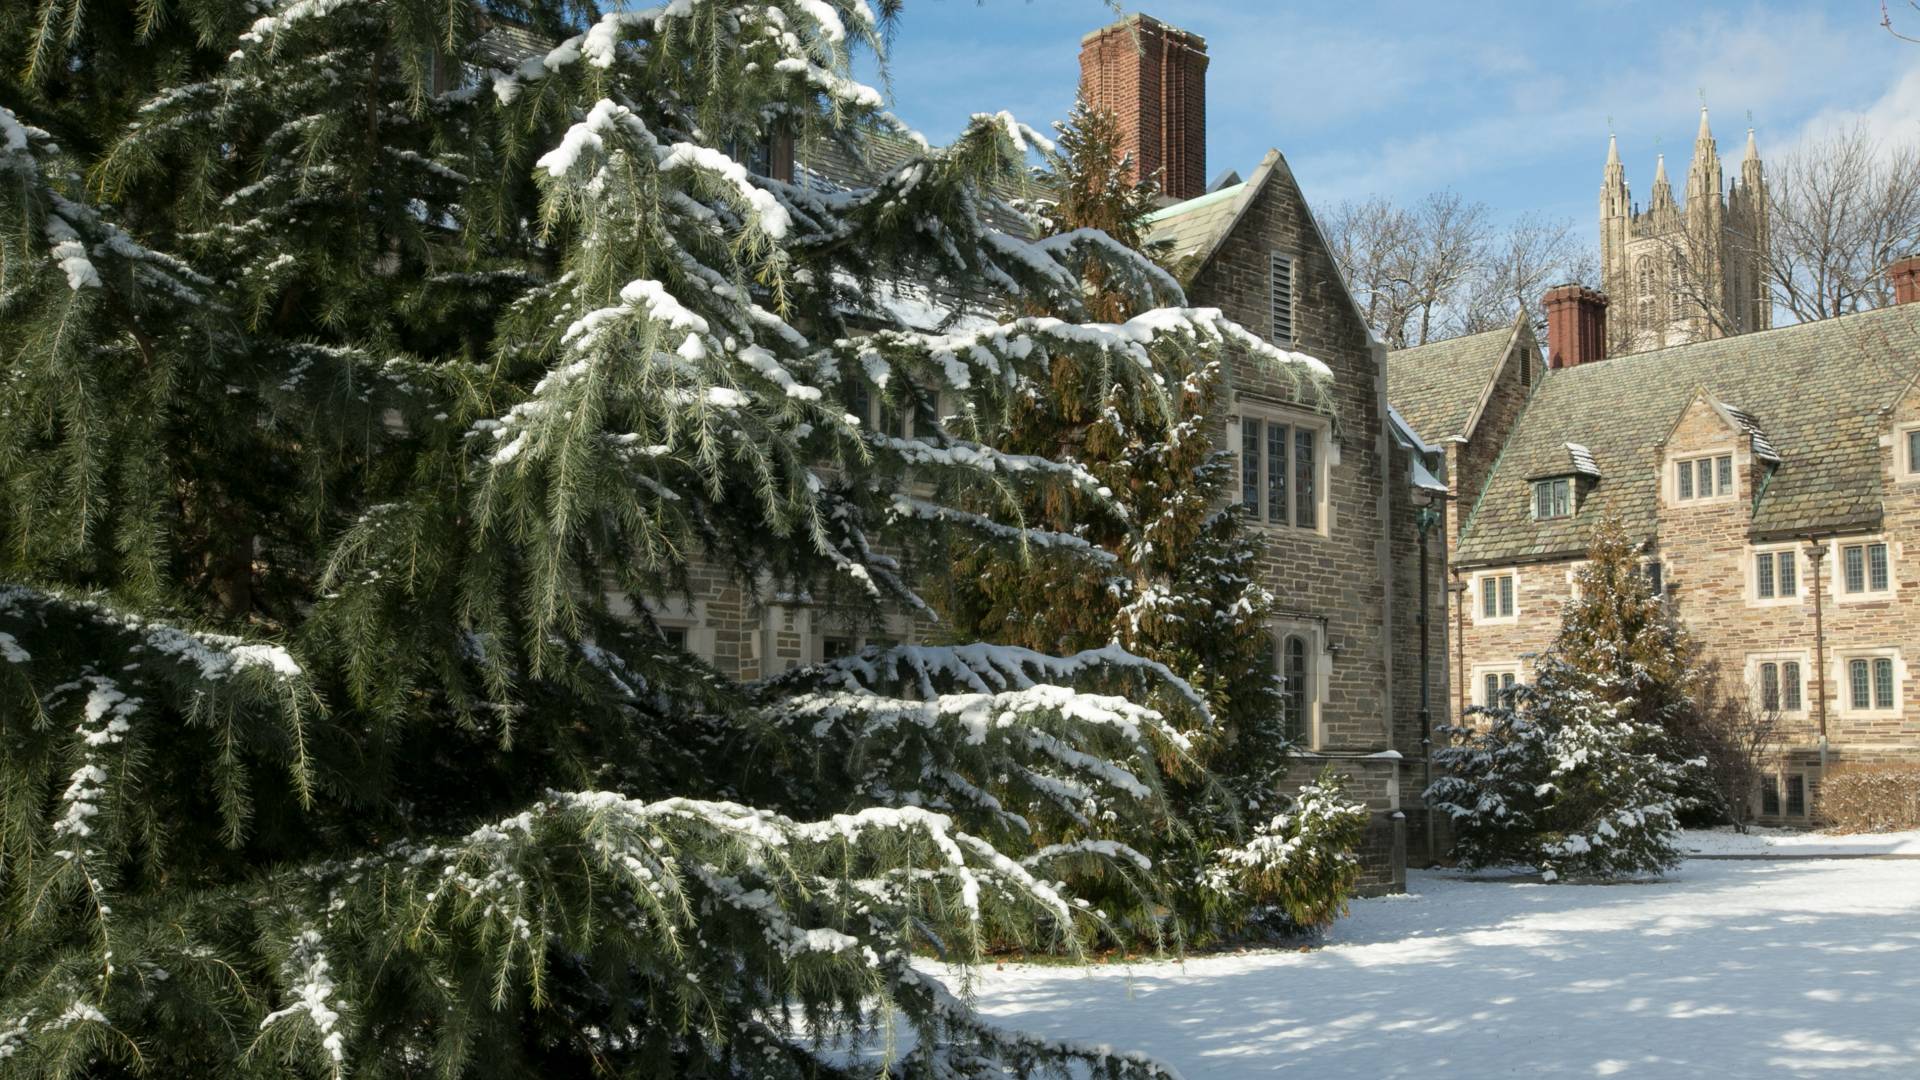 Campus dorms and pine tree in snow